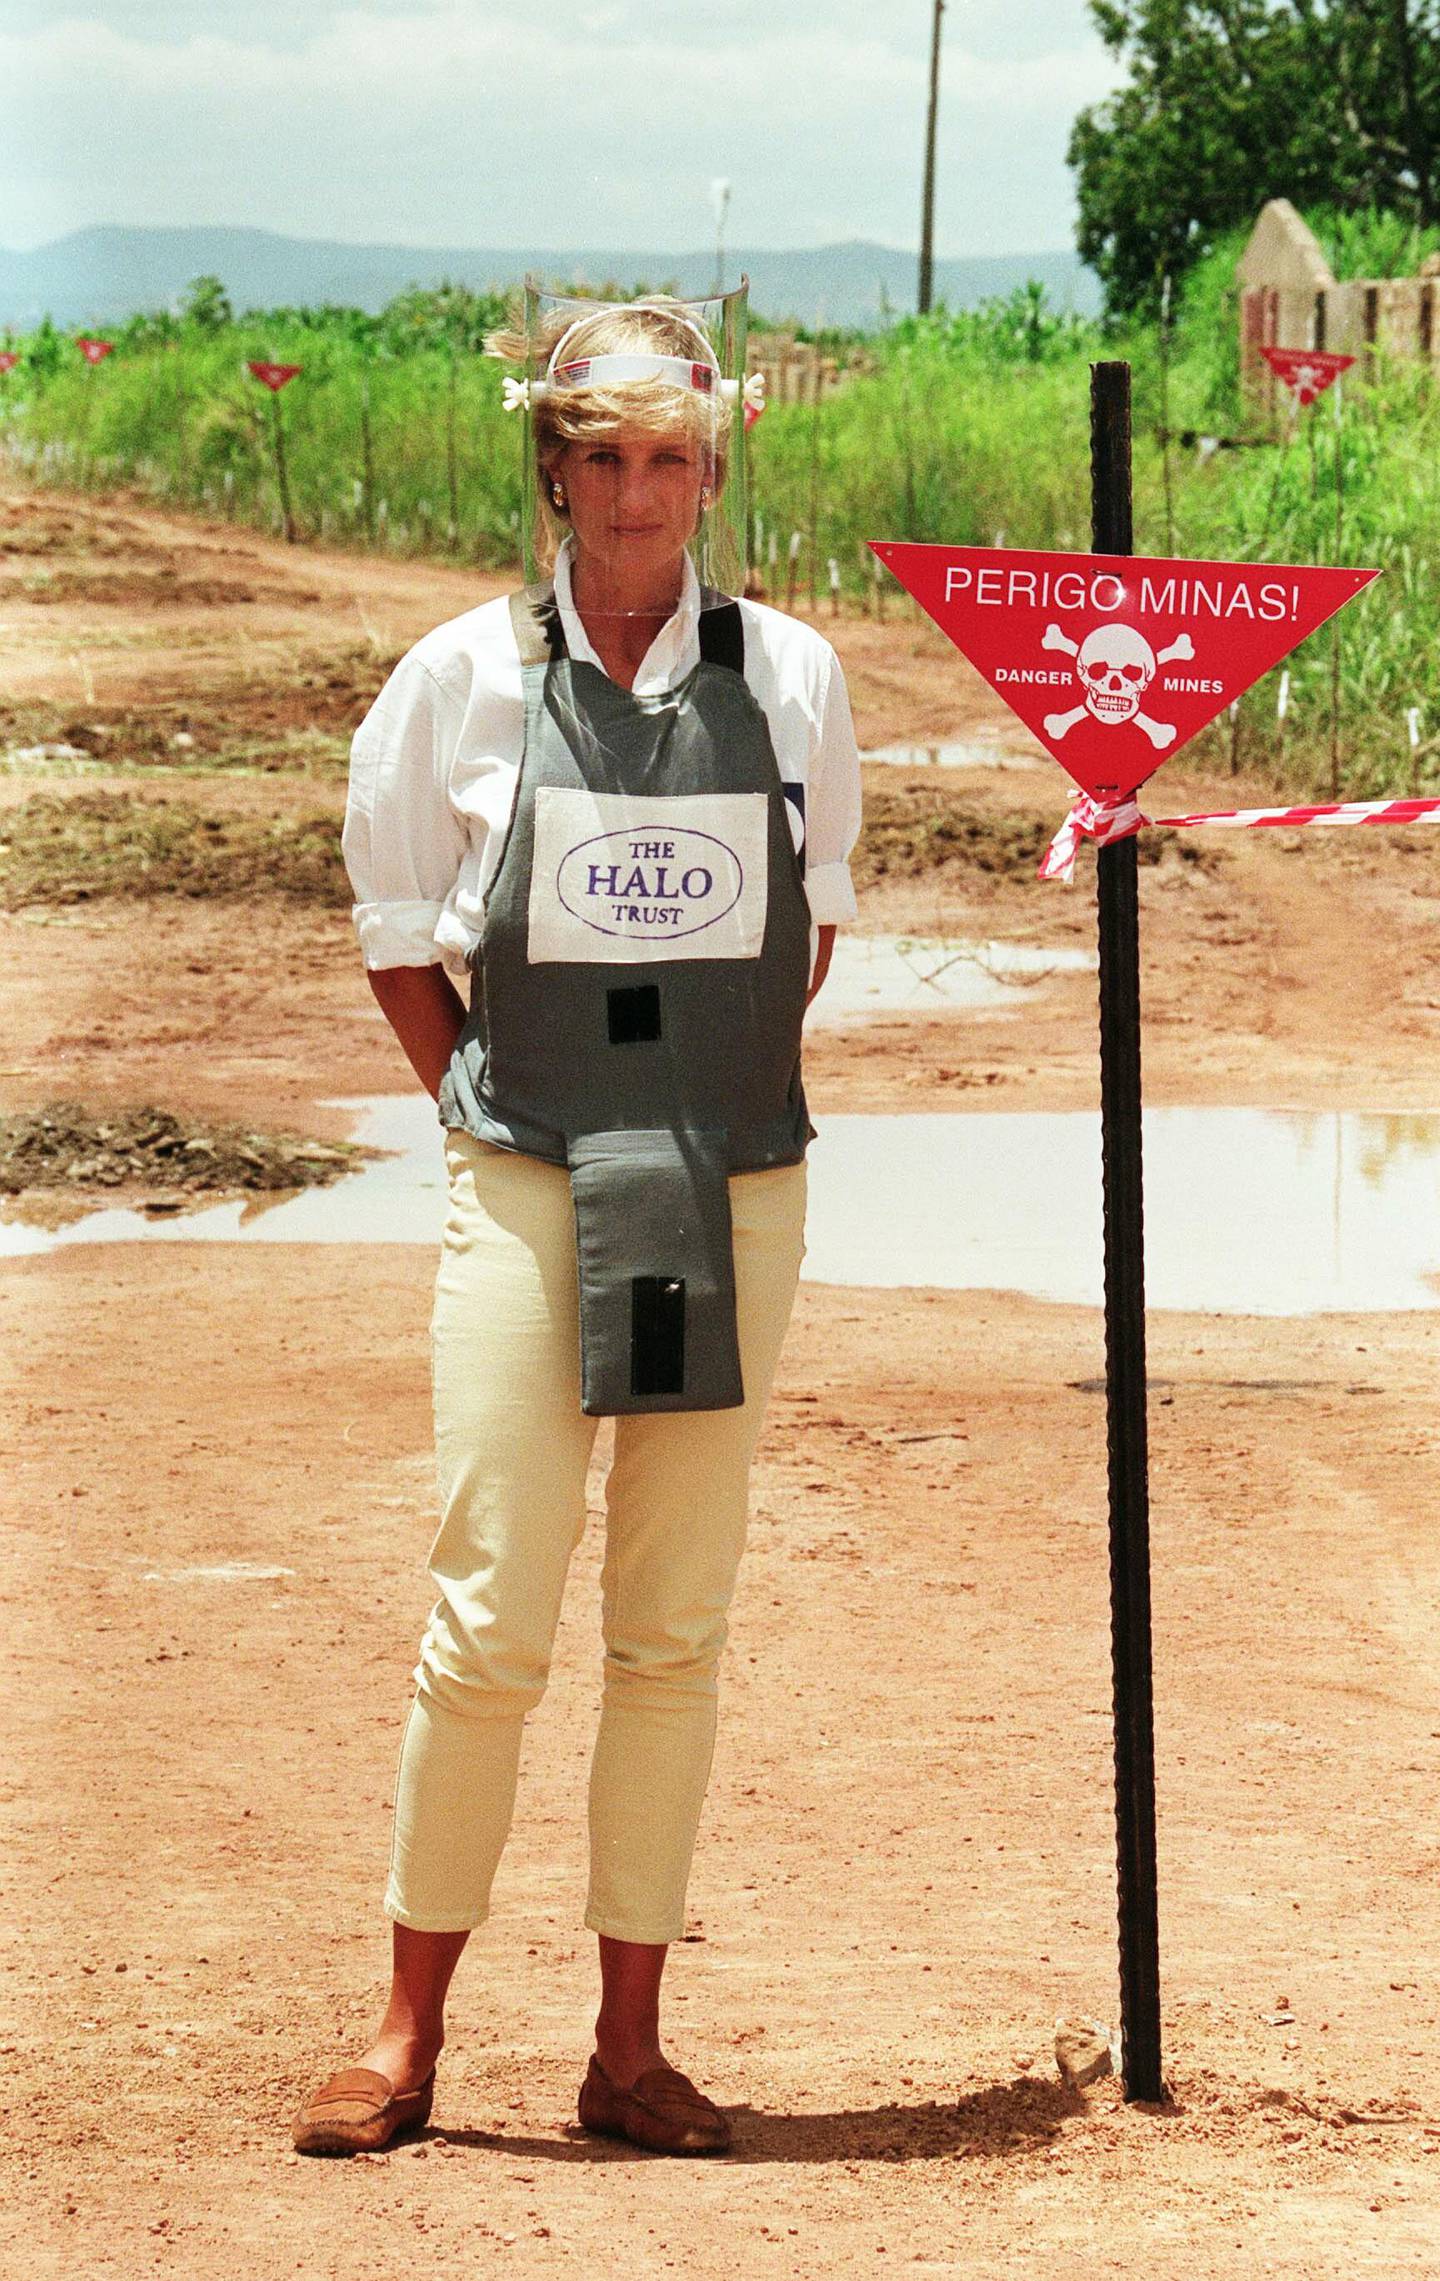 ANGOLA -  JANUARY 30:  Diana, Princess of Wales, walks with body armour and a visor on the minefields during a visit to Angola on January 30, 1997.  (Photo by Anwar Hussein/WireImage/Getty Images)  